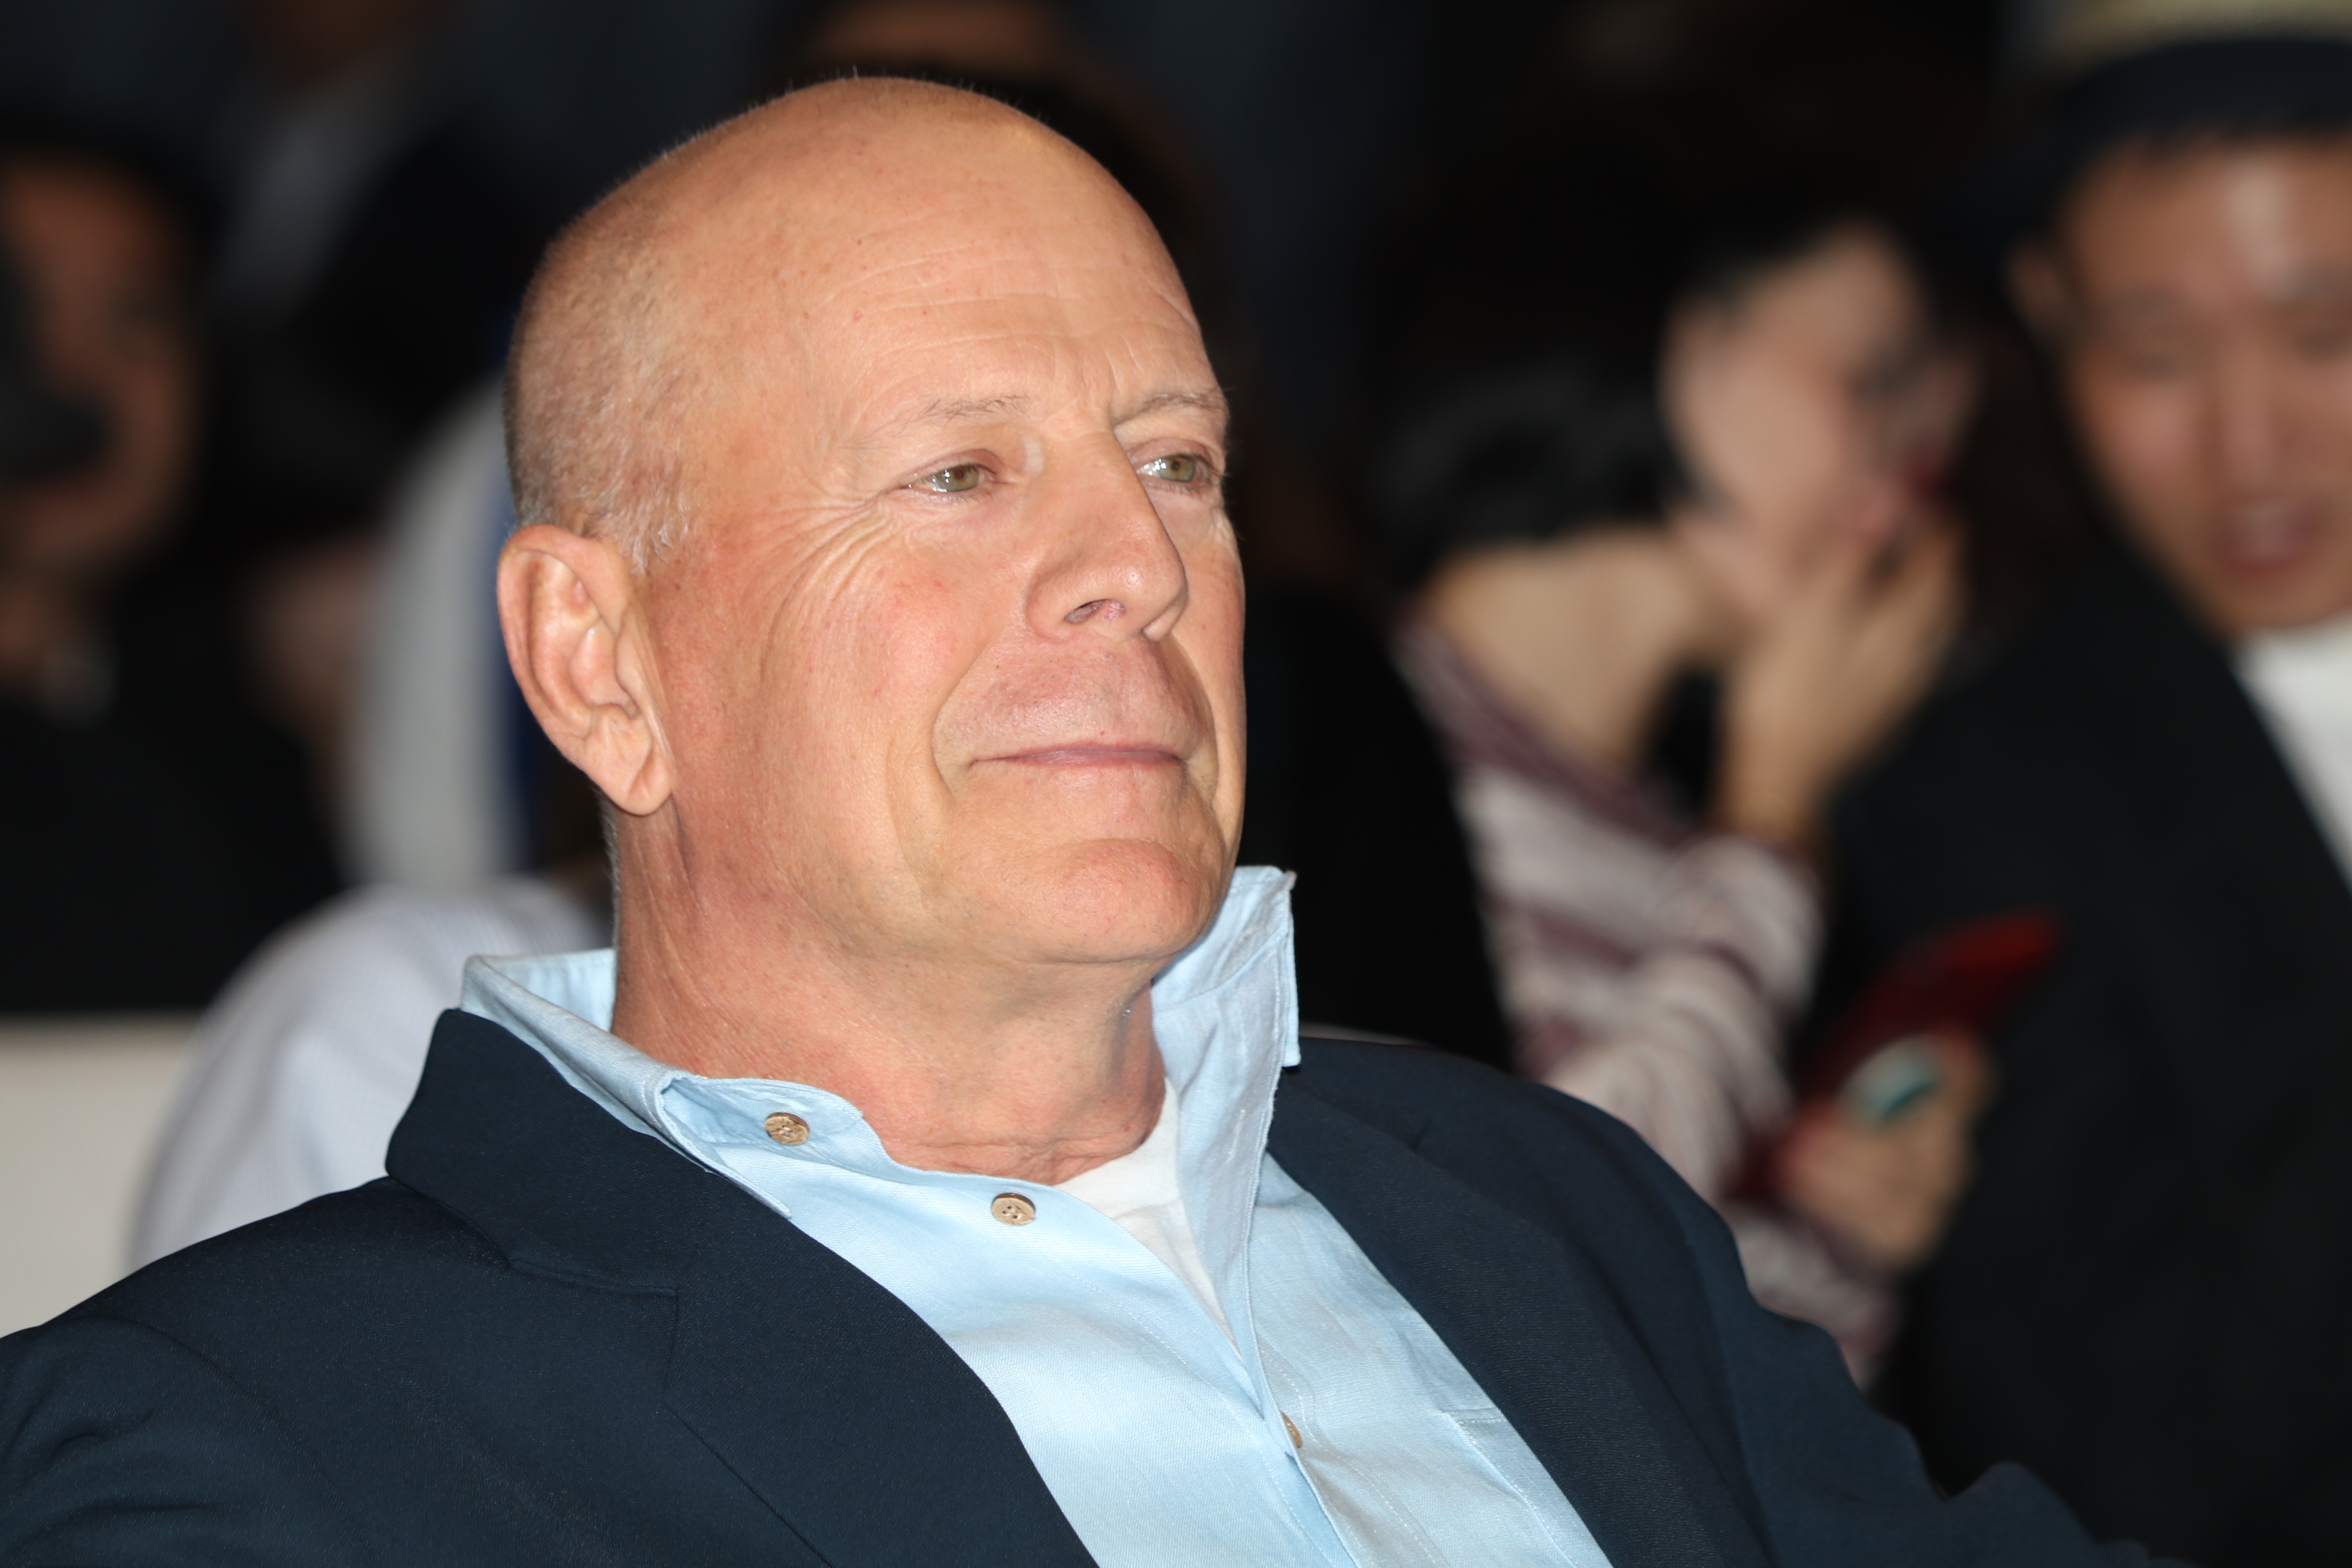 Bruce Willis smiles slightly, wearing a light shirt under a dark blazer. Blurred individuals in the background are engaged in conversation